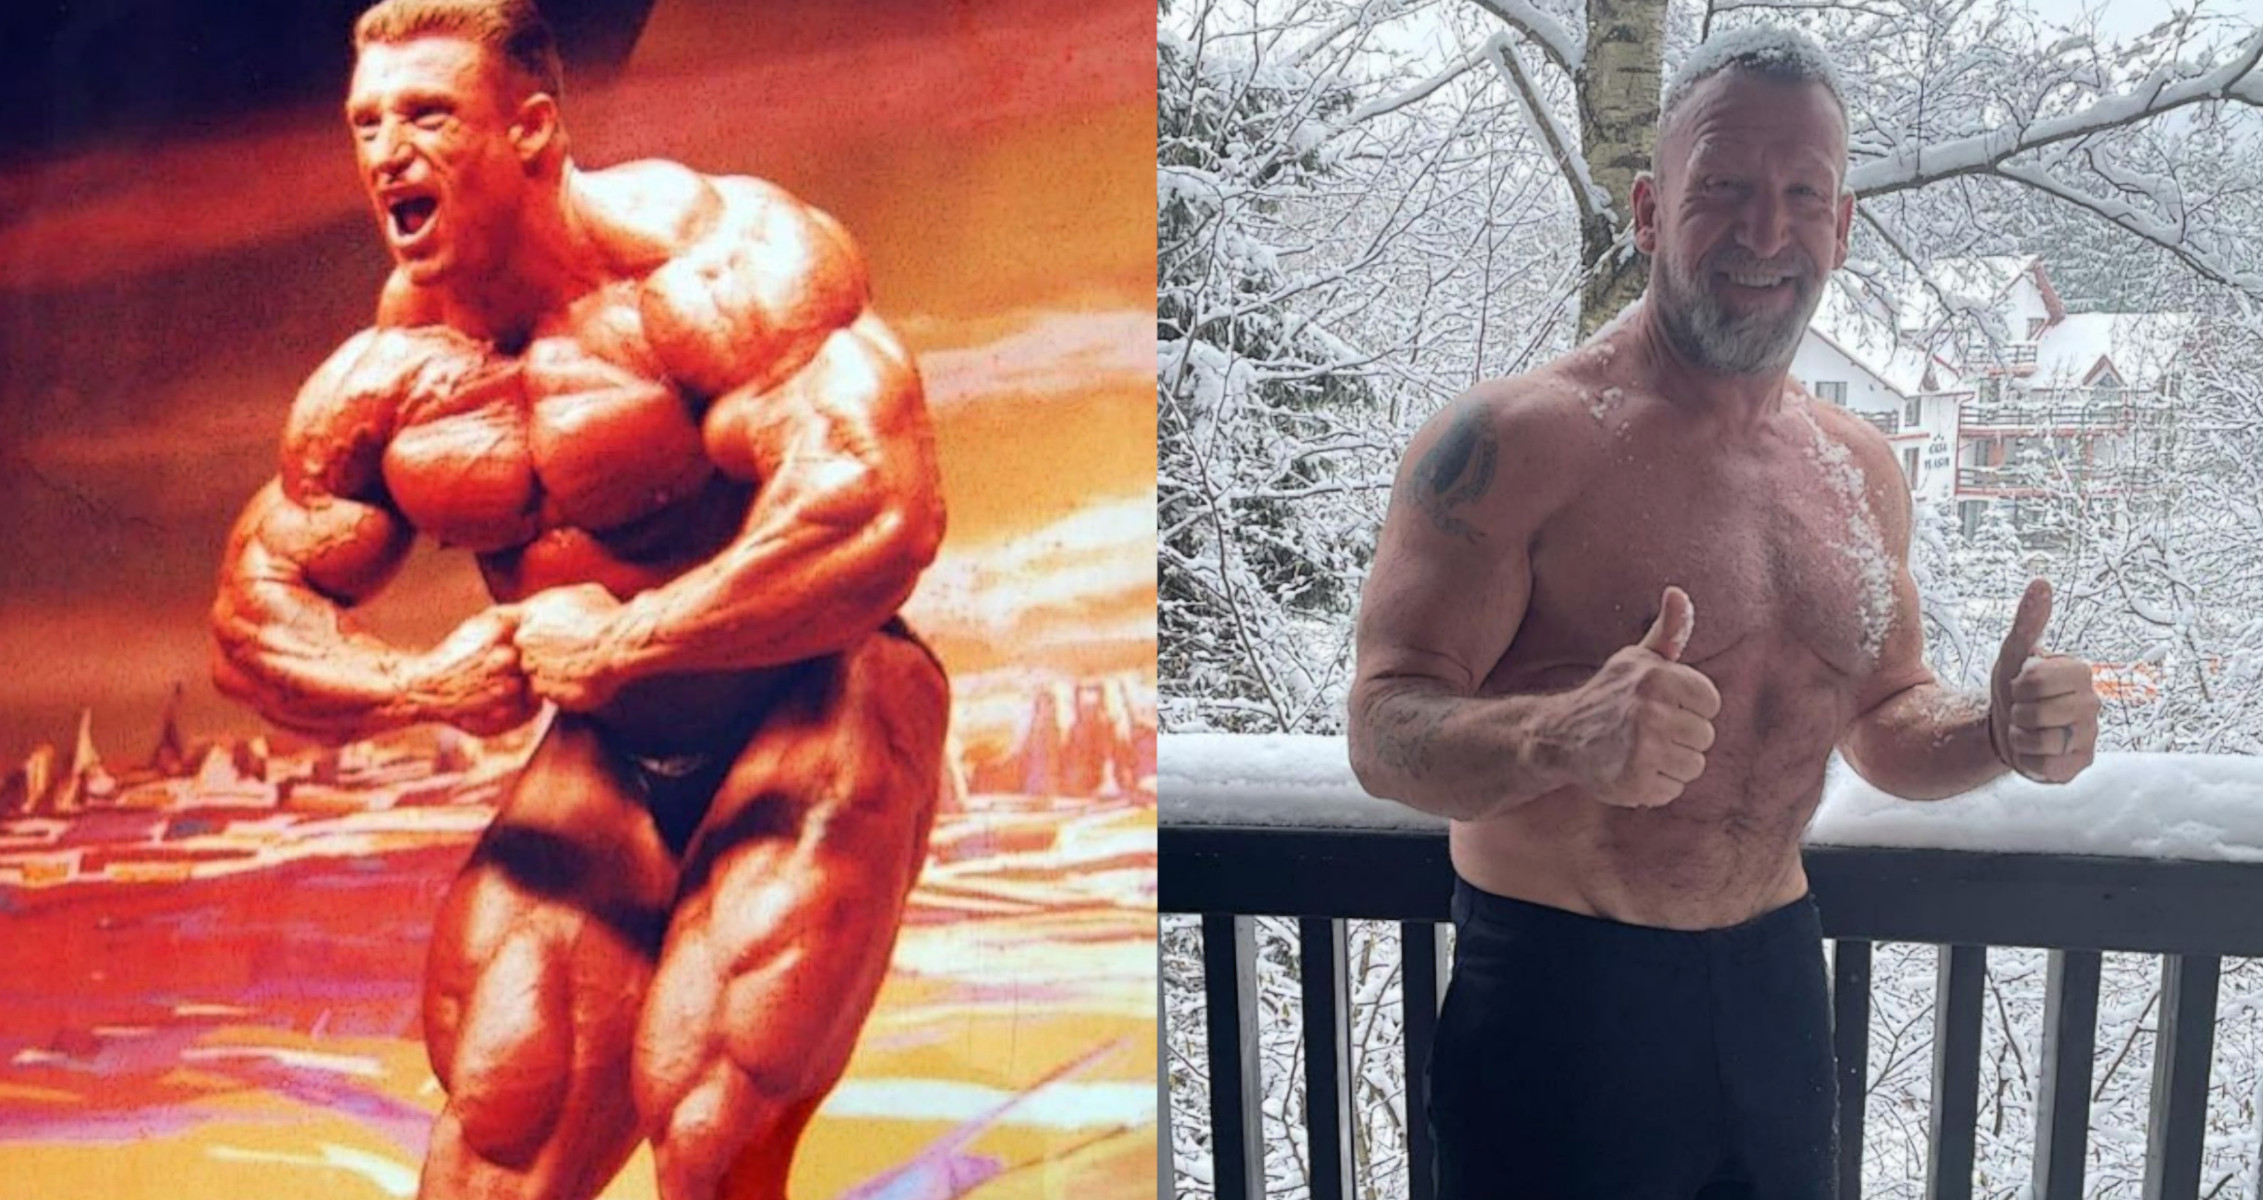 Dorian Yates Says Weight Training Is Best Way To Get In Shape